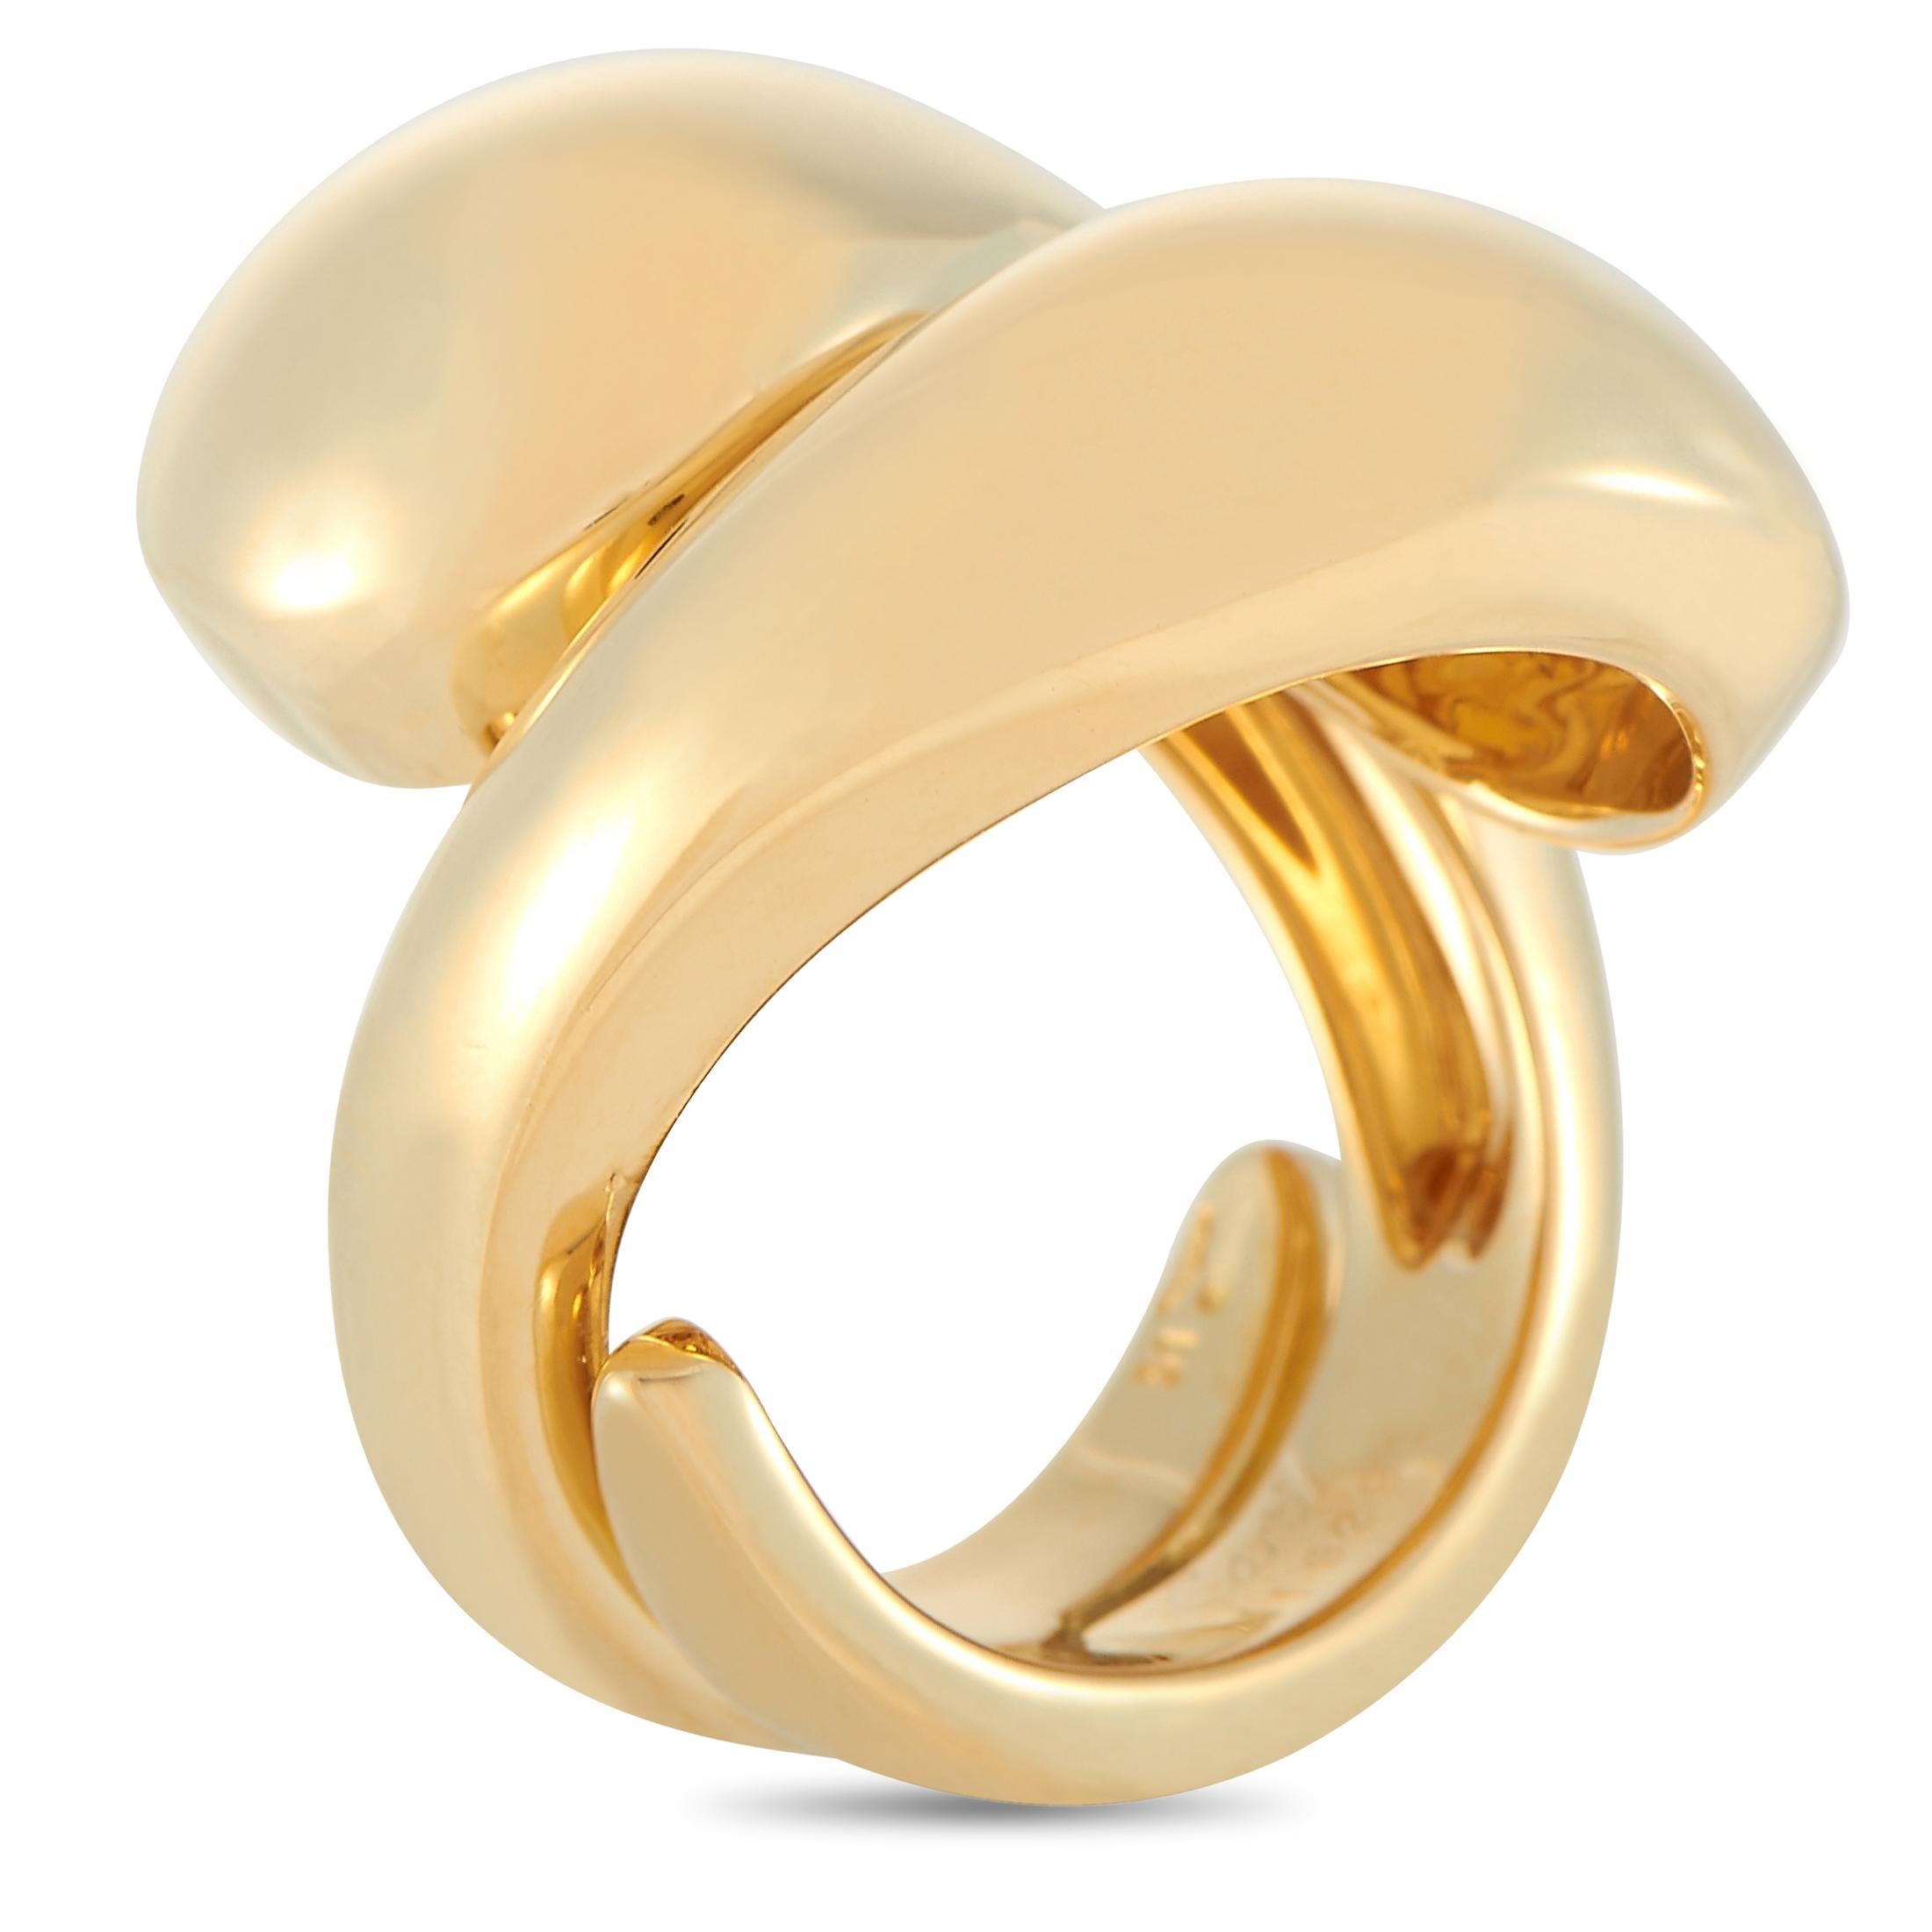 The Cartier “Le Yin et le Yang” ring is crafted from 18K yellow gold and weighs 20.5 grams. The ring boasts band thickness of 7 mm and top height of 5 mm, while top dimensions measure 25 by 20 mm.
 
 This item is offered in estate condition and